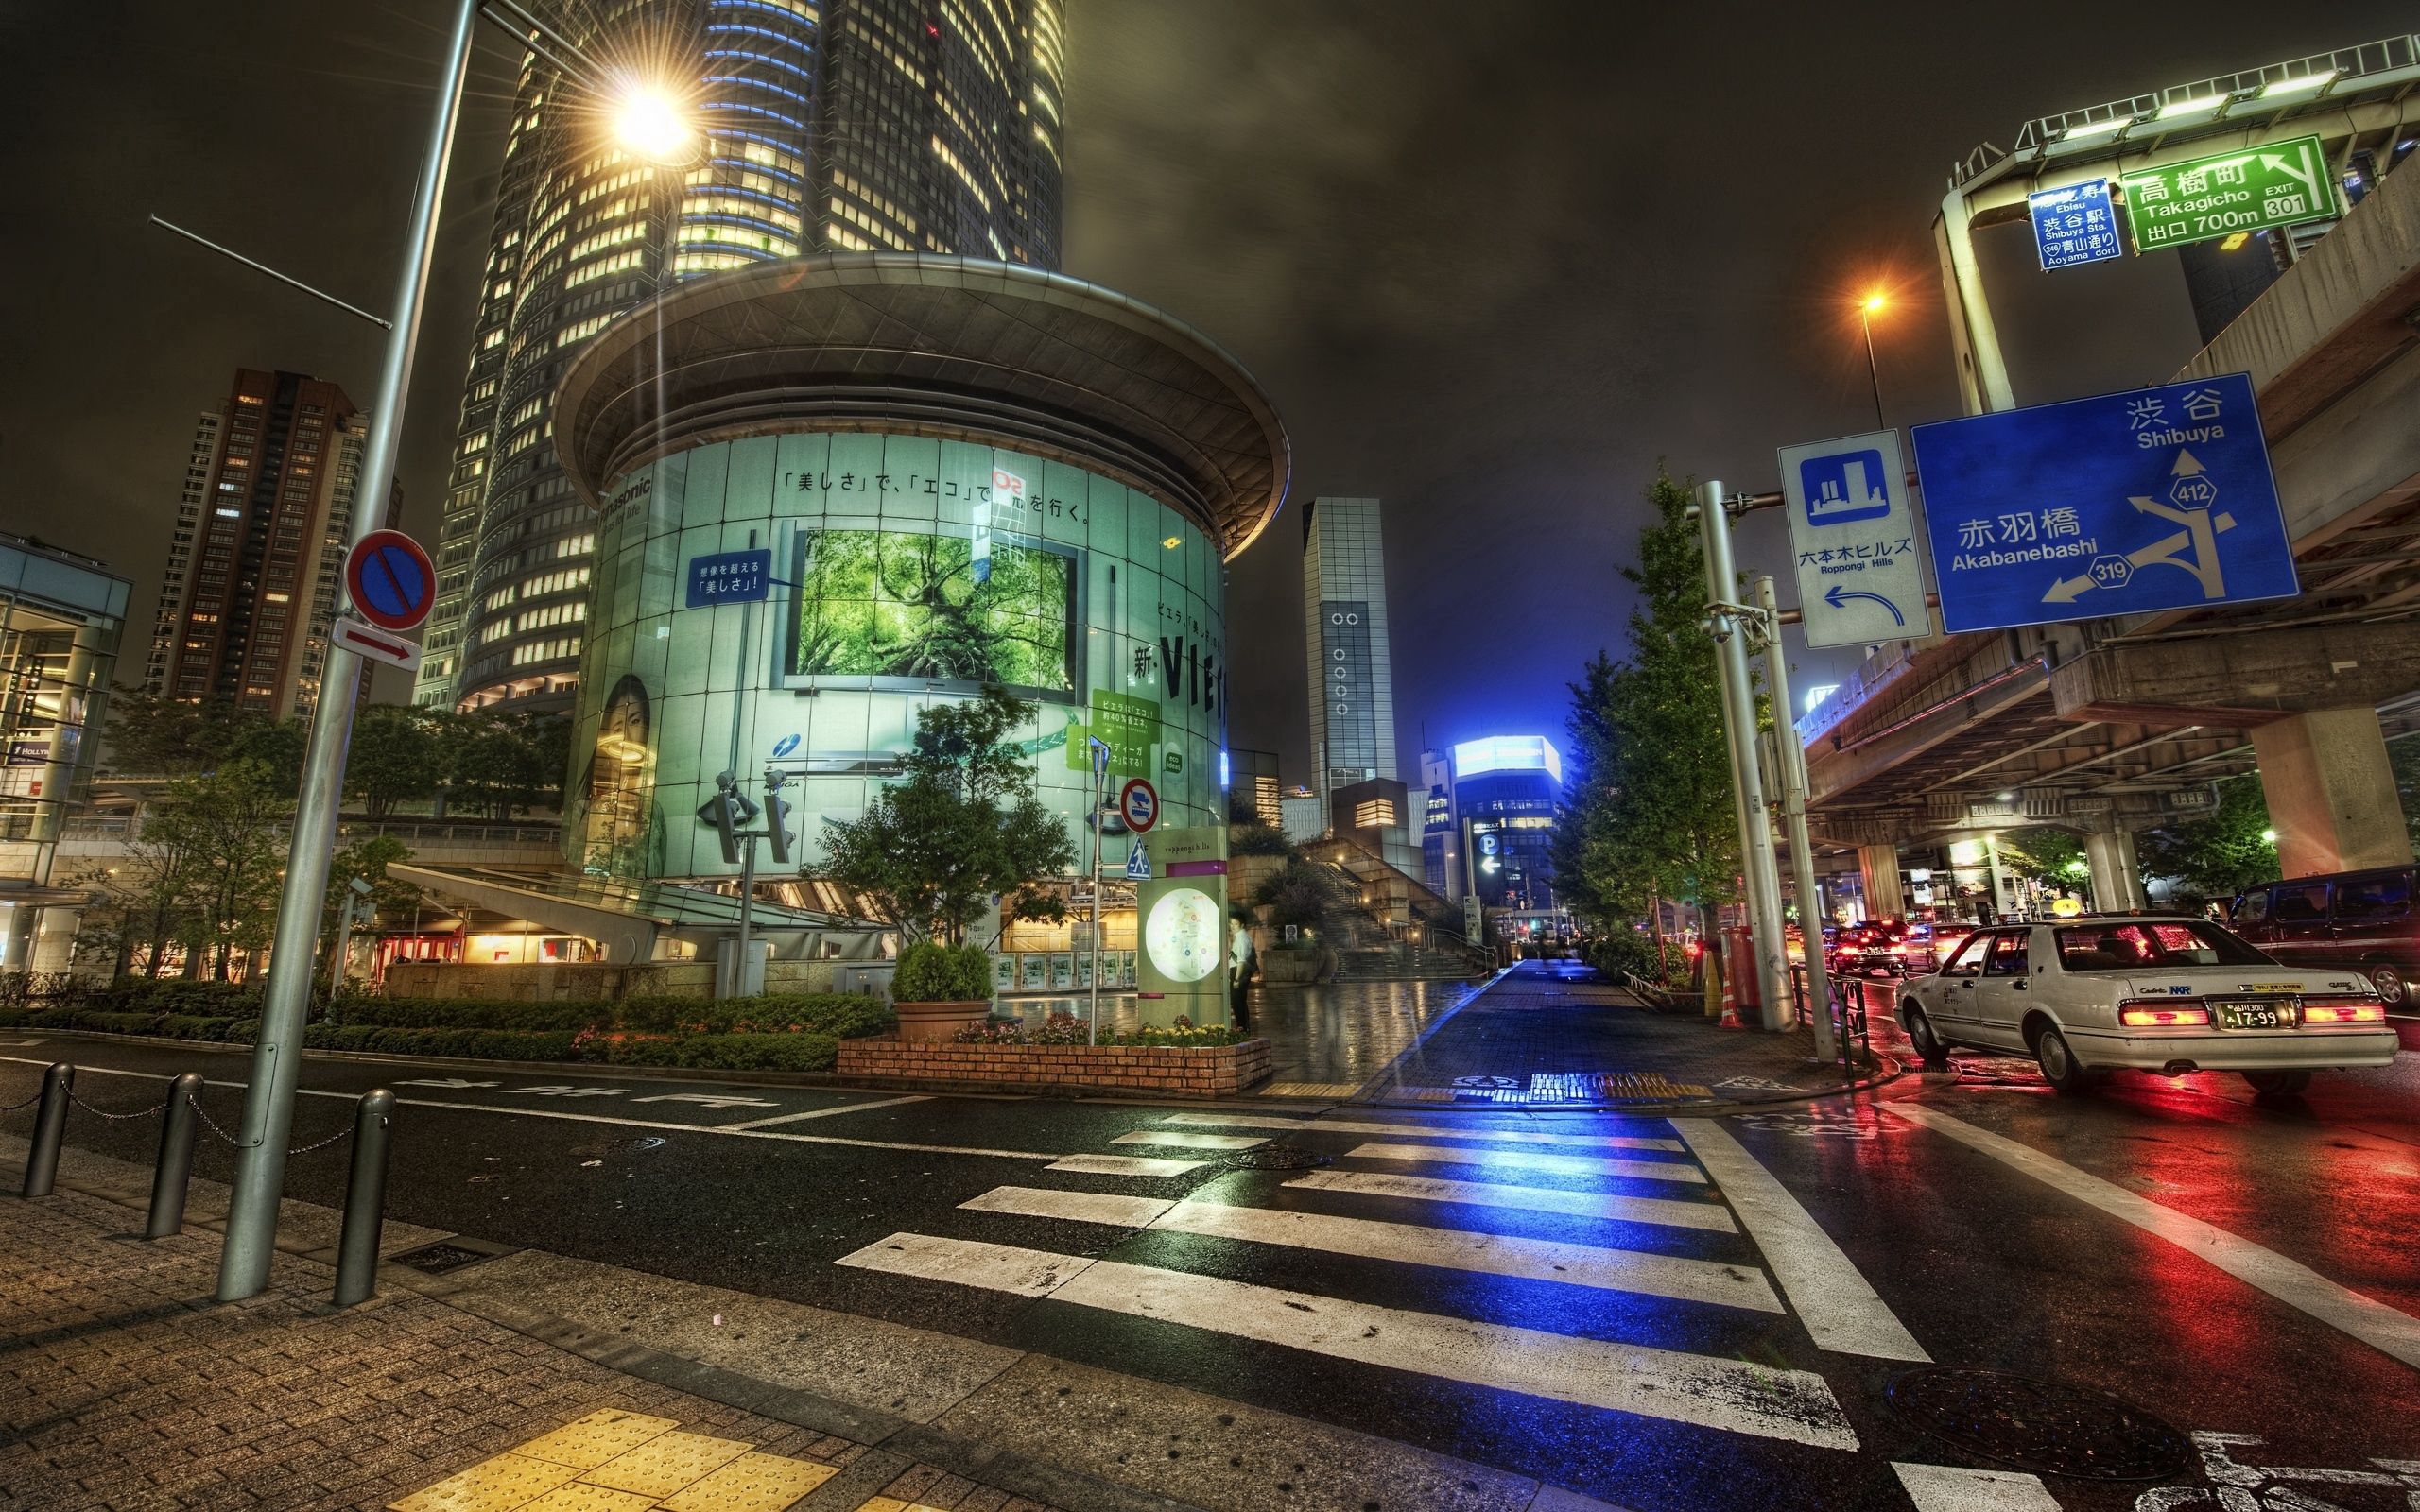 megalopolis, megapolis, night, street collection of HD images